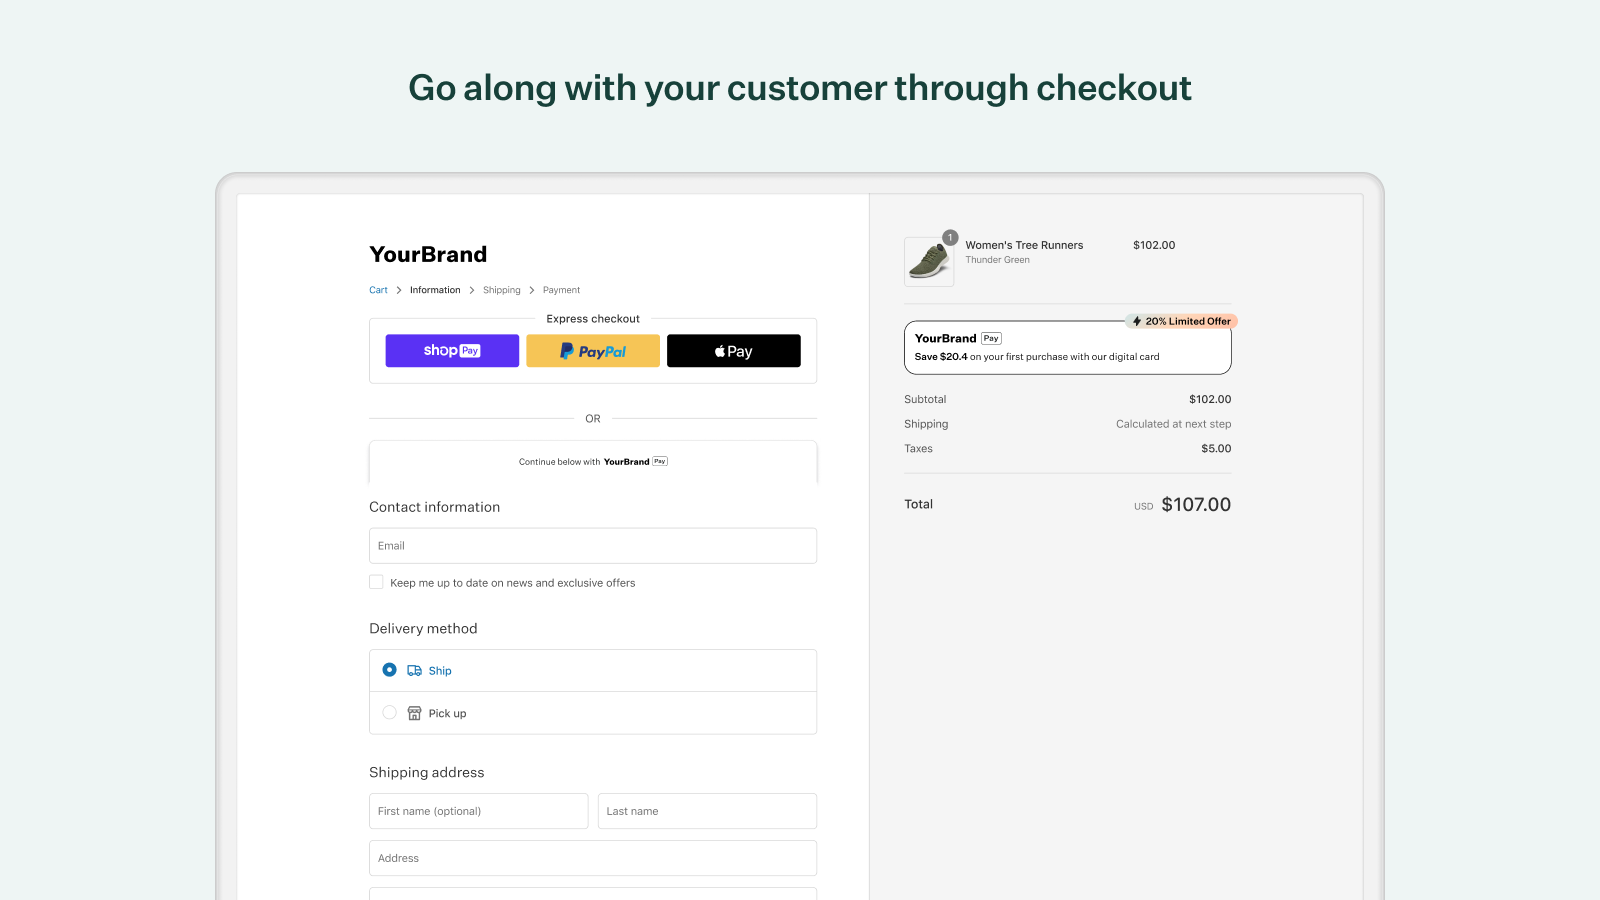 Go along with your customer through checkout